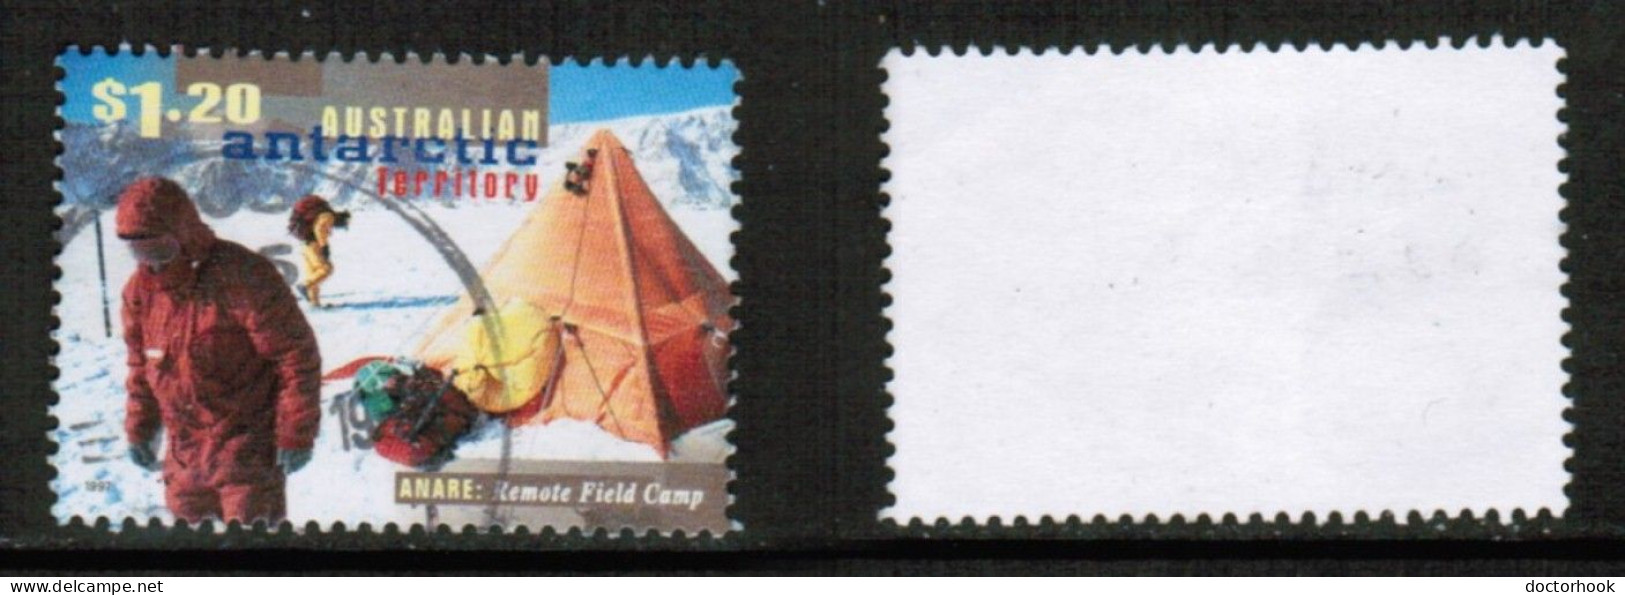 AUSTRALIAN ANTARCTIC TERRITORY   Scott # L 106 USED (CONDITION AS PER SCAN) (Stamp Scan # 930-4) - Gebraucht